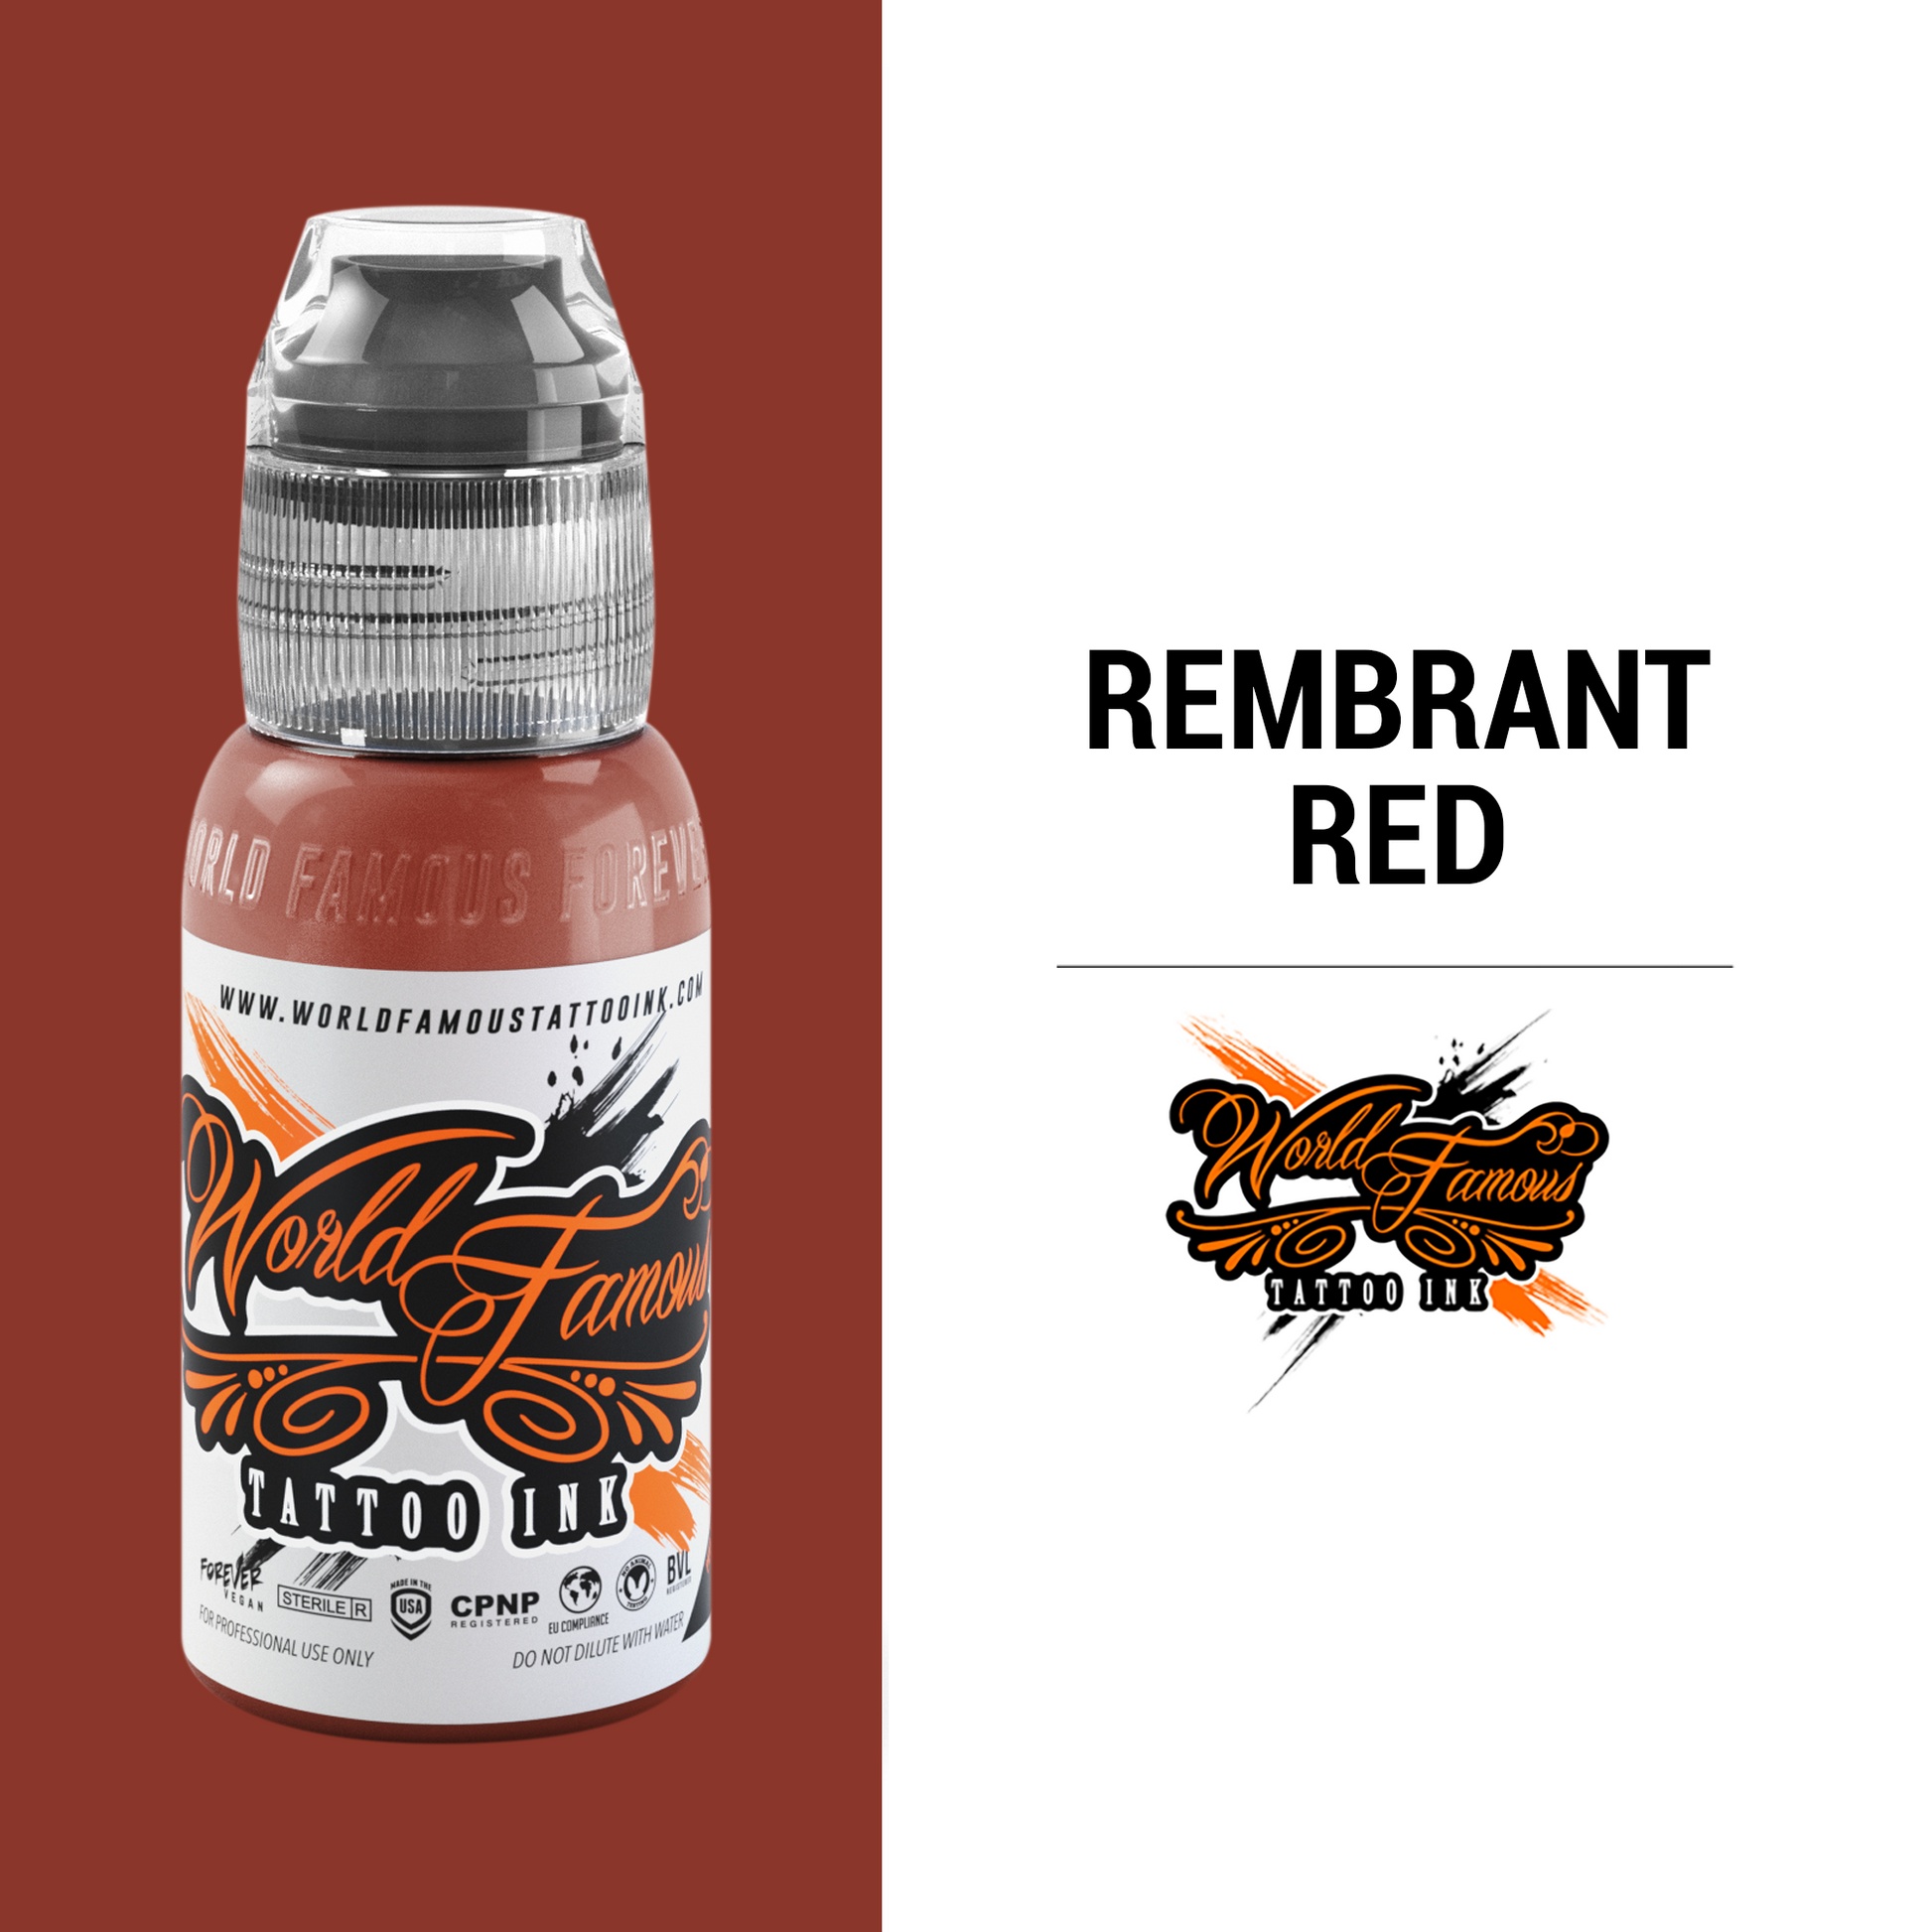 Rembrant Red | World Famous Tattoo Ink